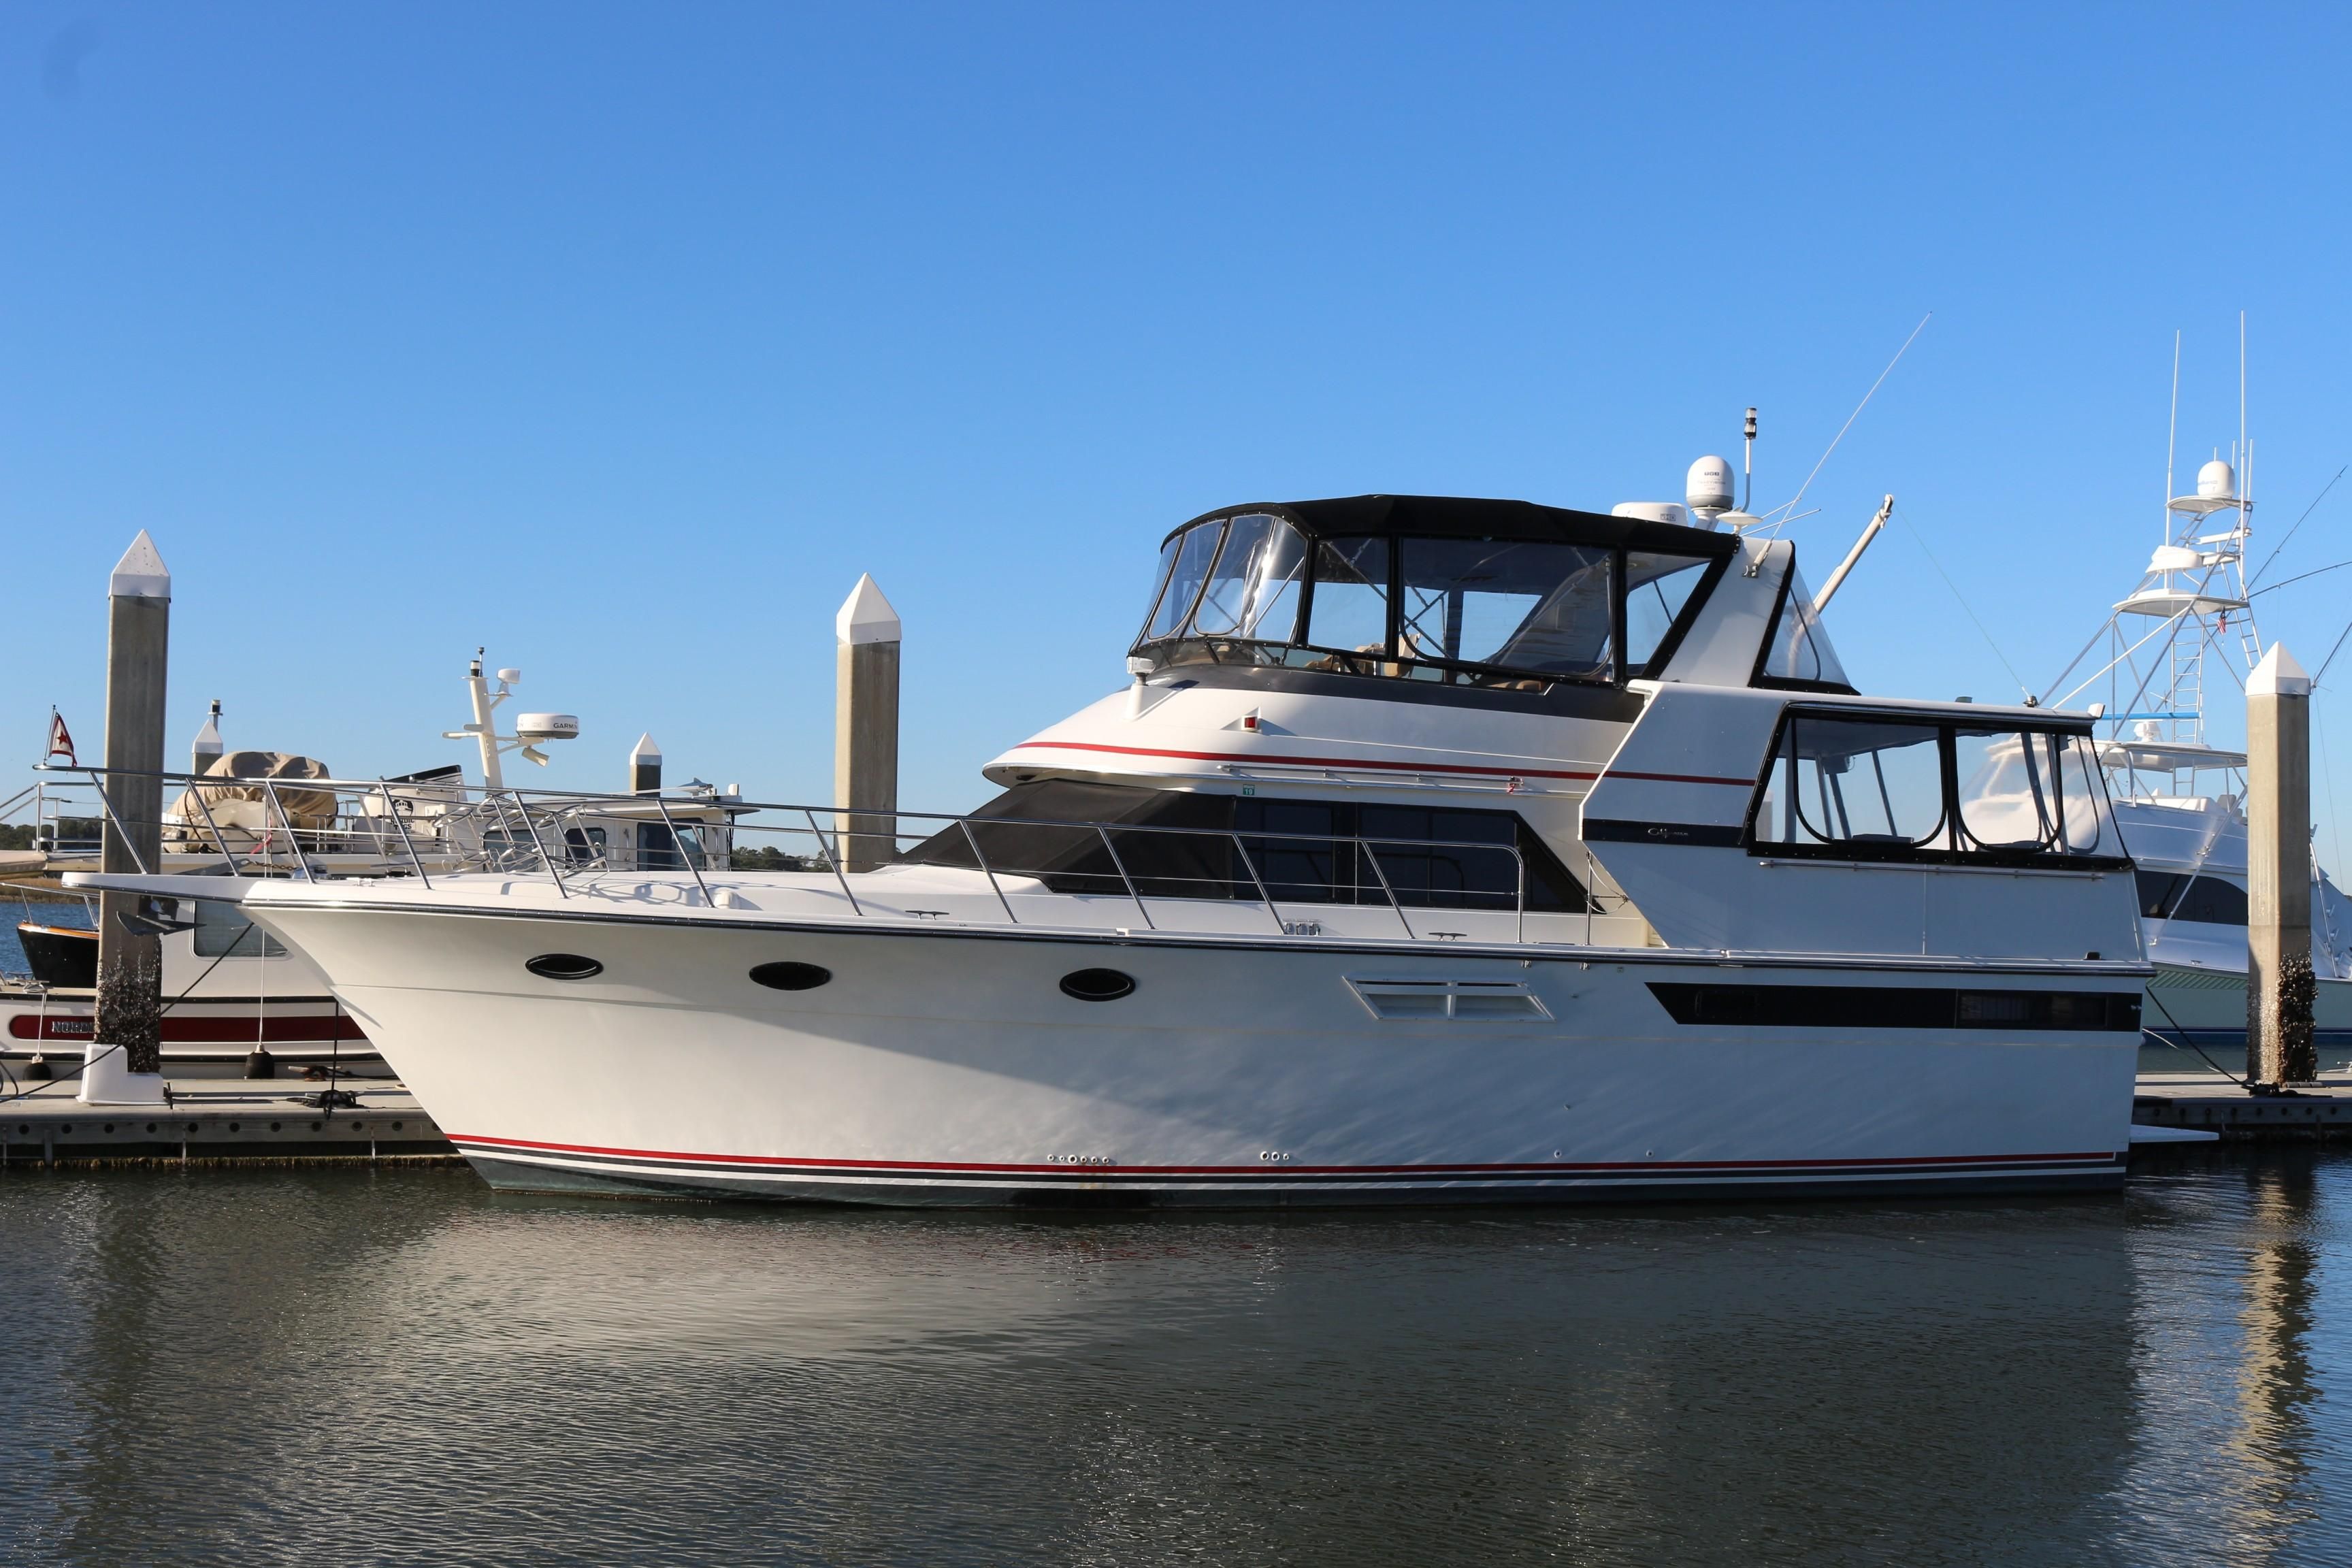 48 ft motor yachts for sale